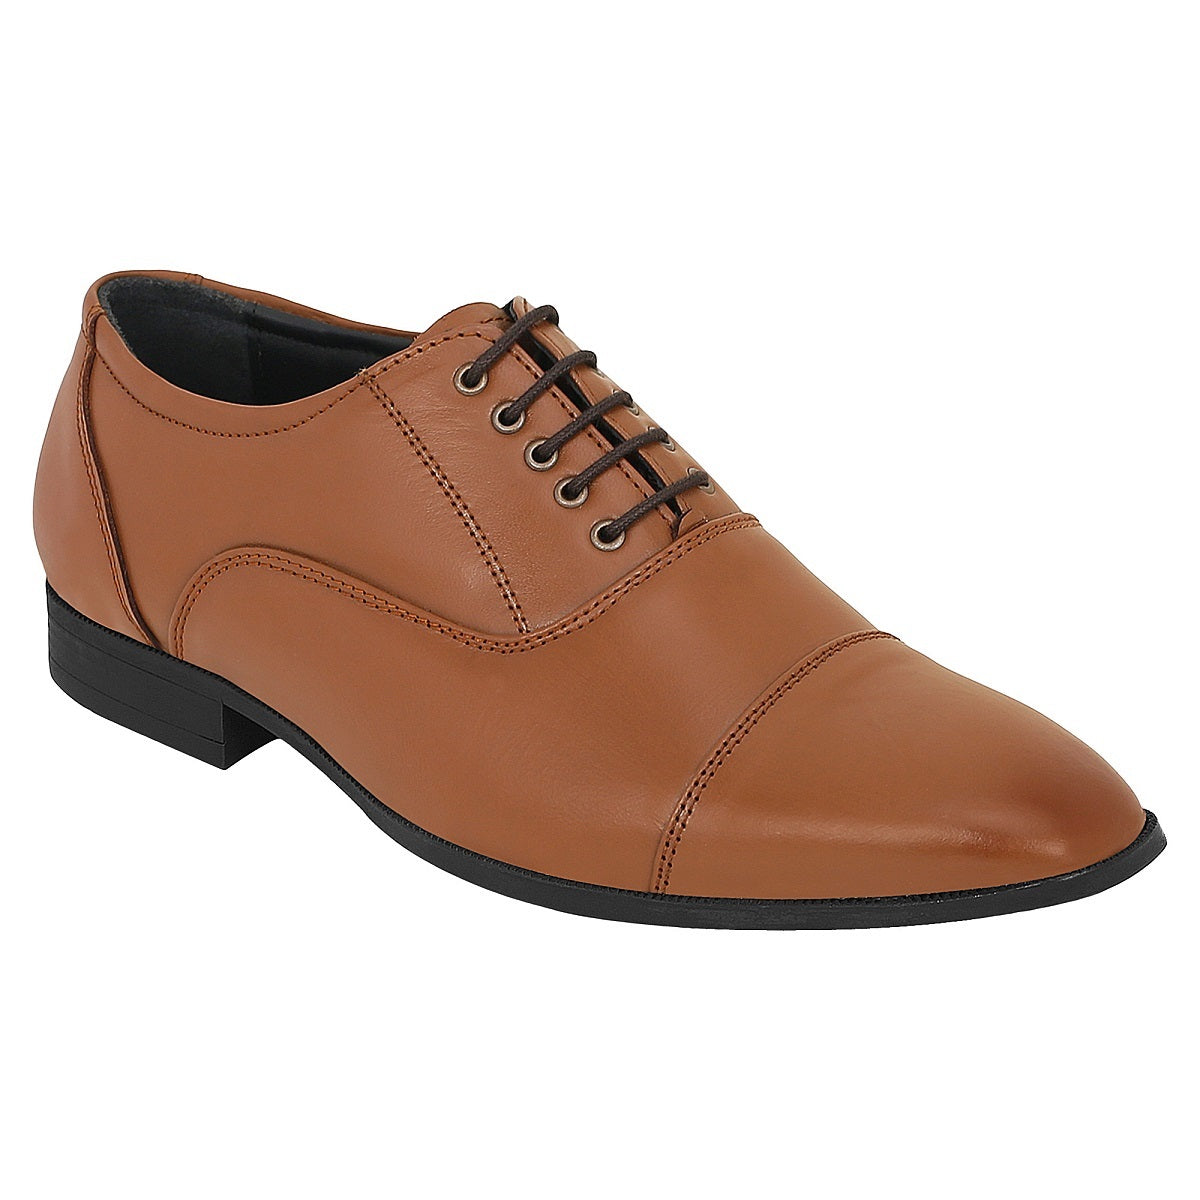 Charles Oxford Leather Formal Shoes